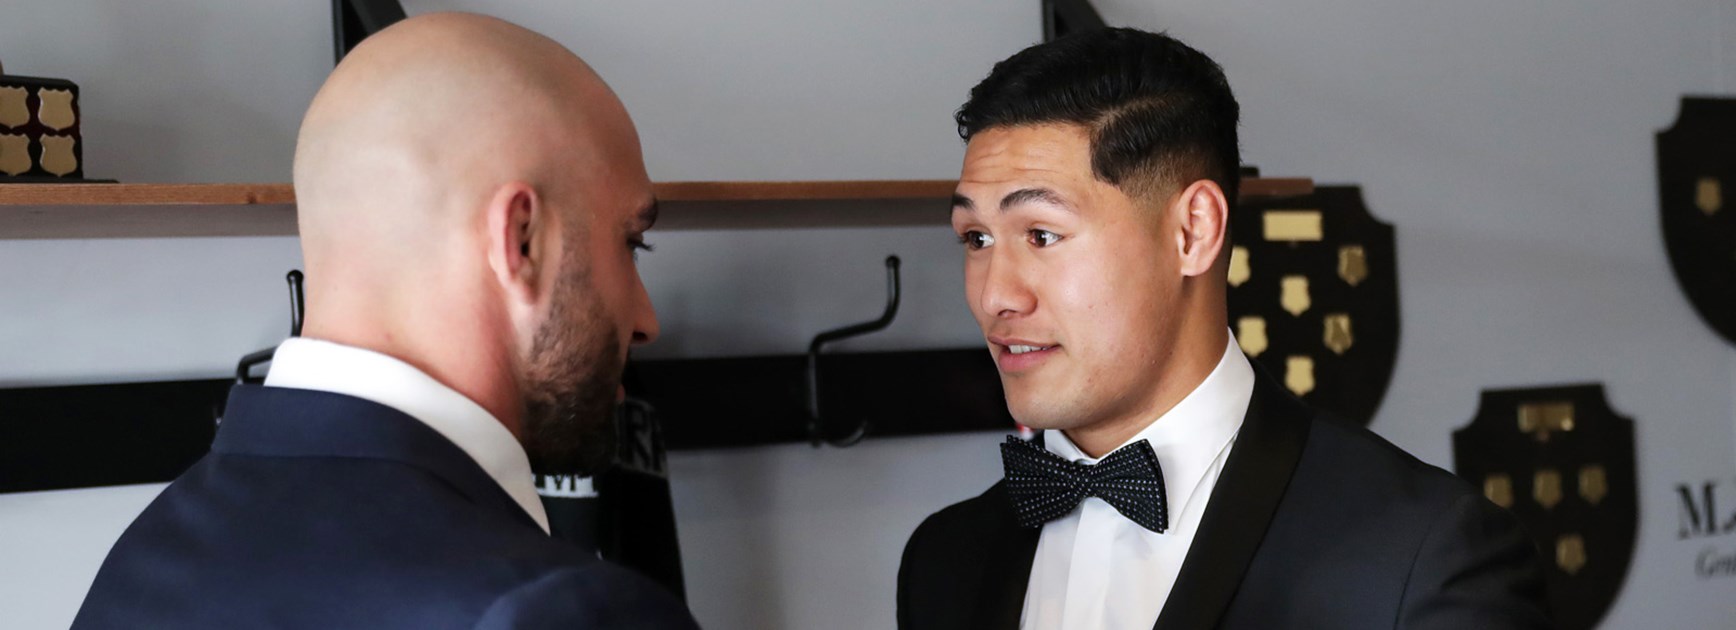 Tim Mannah and Roger Tuivasa-Sheck get ready for the Dally M Awards night.